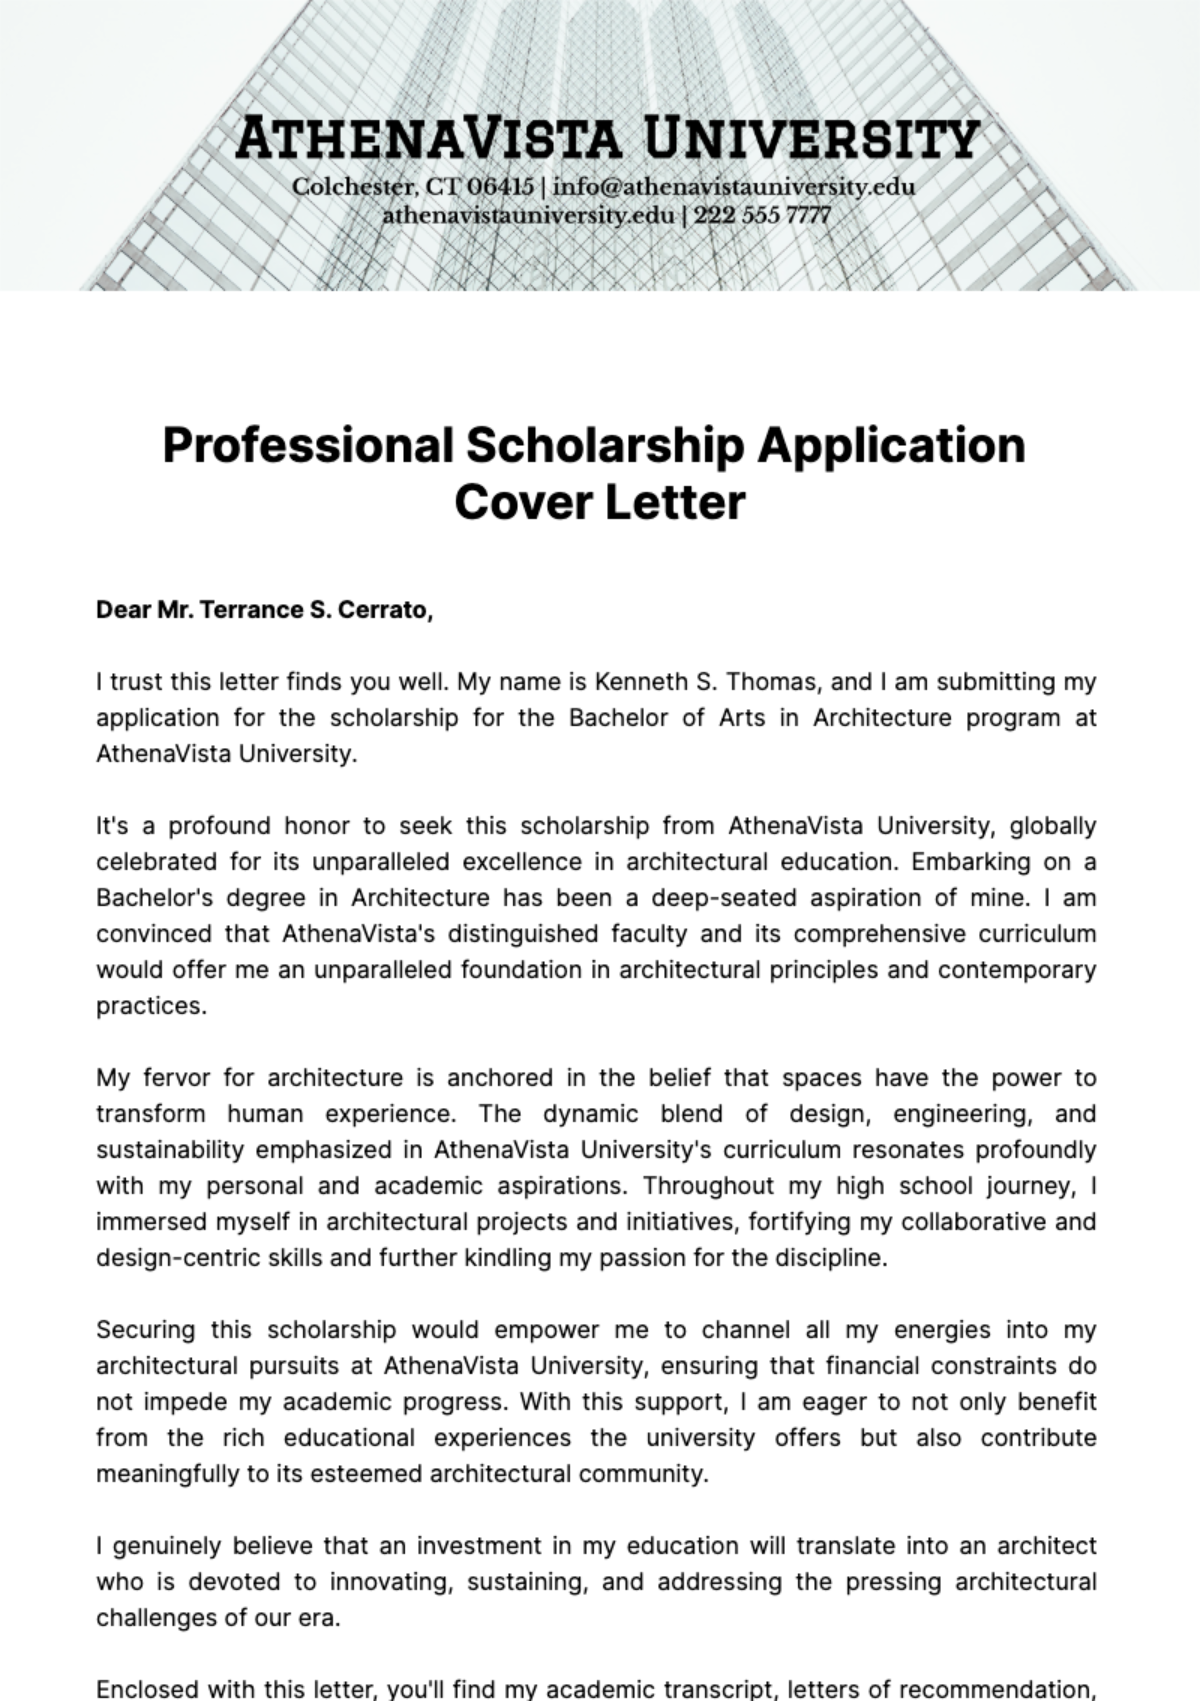 Free Professional Scholarship Application Cover Letter Template